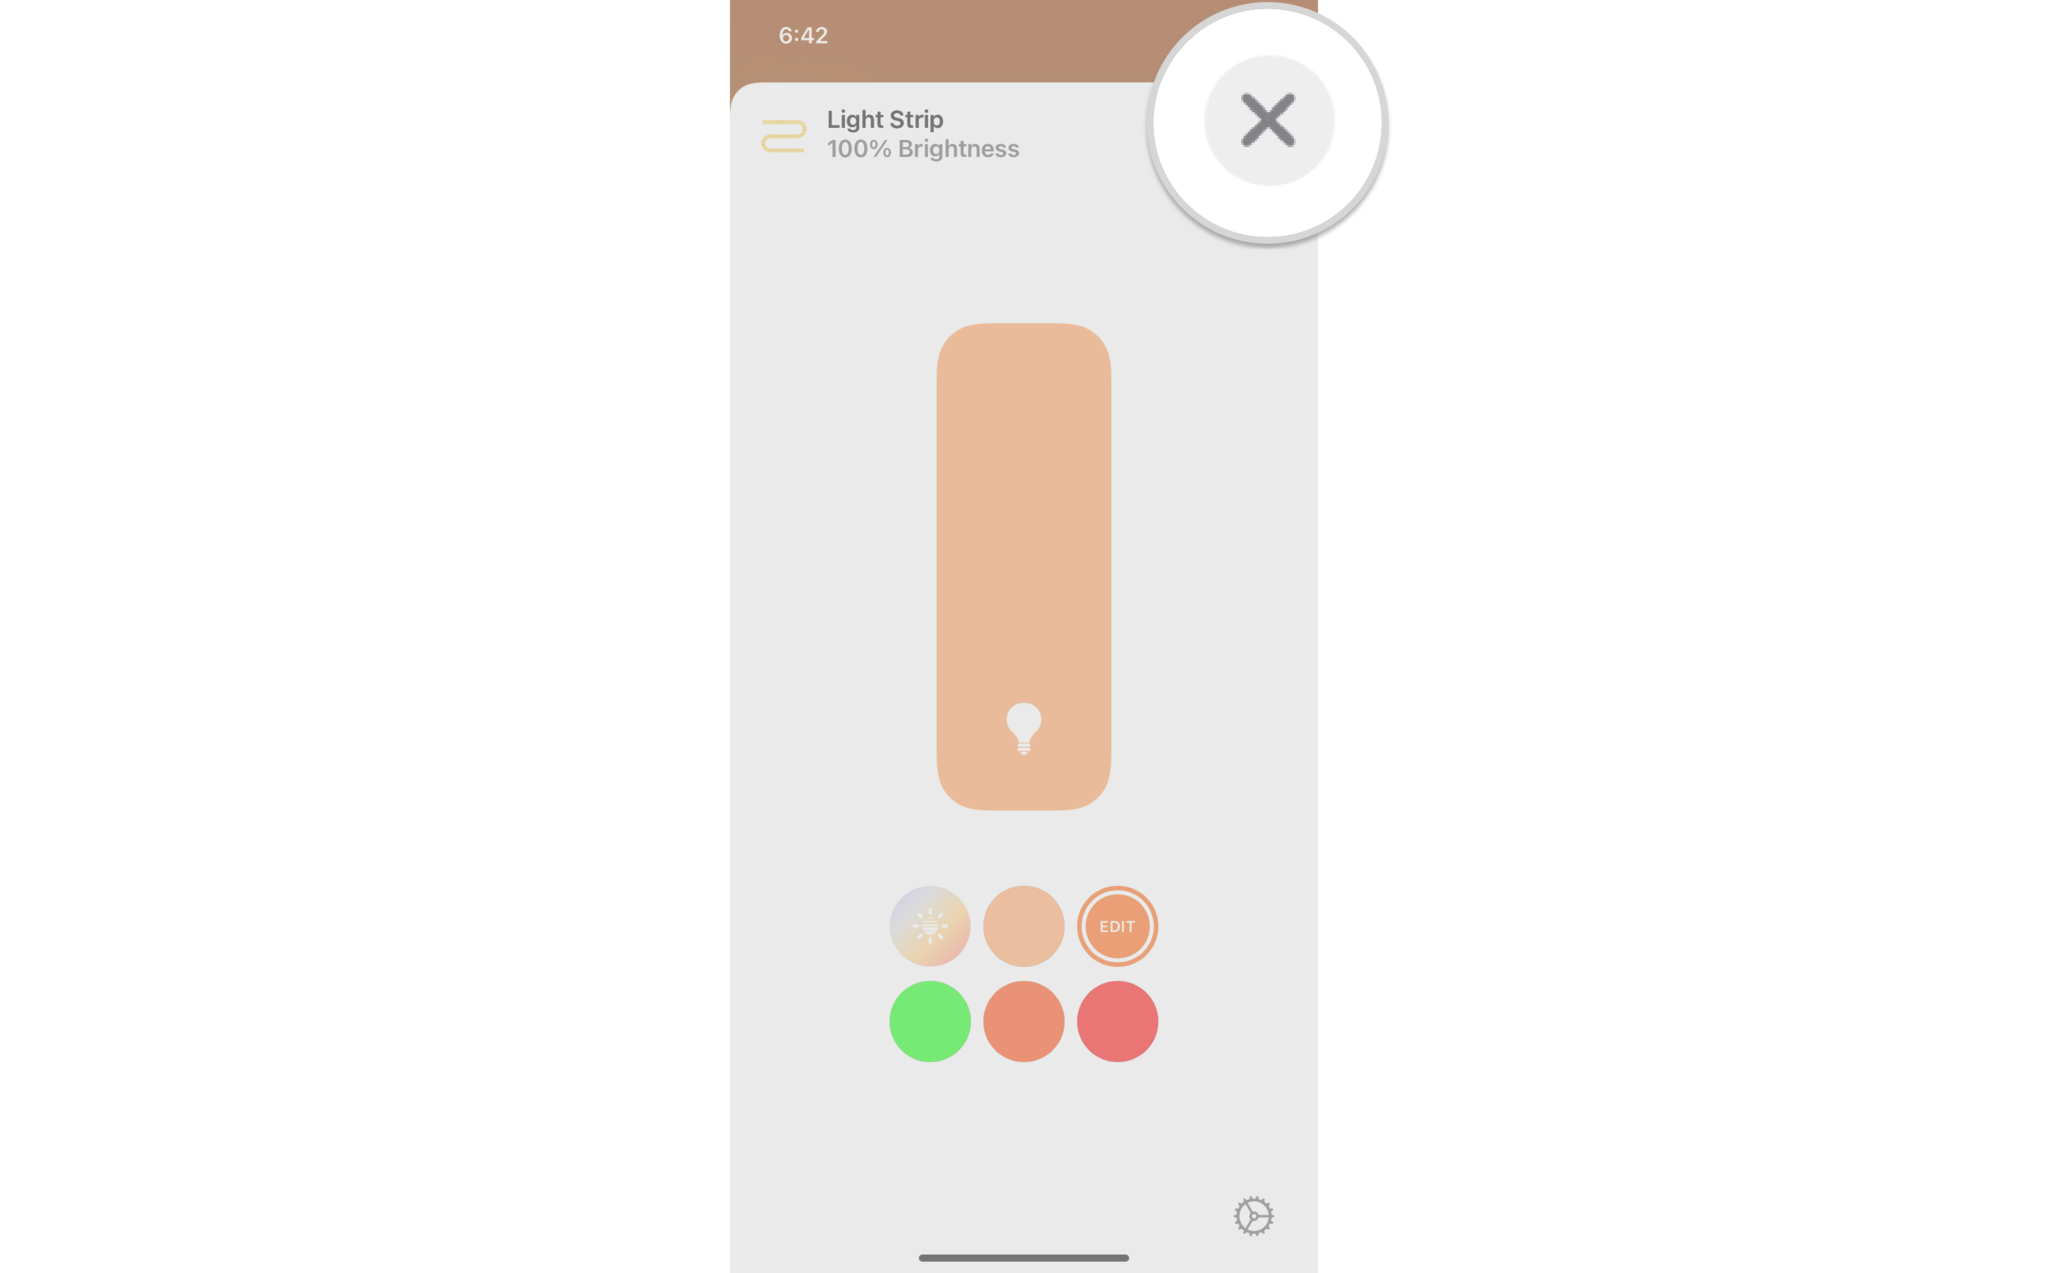 How to set color temperature for HomeKit lights in the Home app on iPhone by showing steps: Tap the X button to save your selection